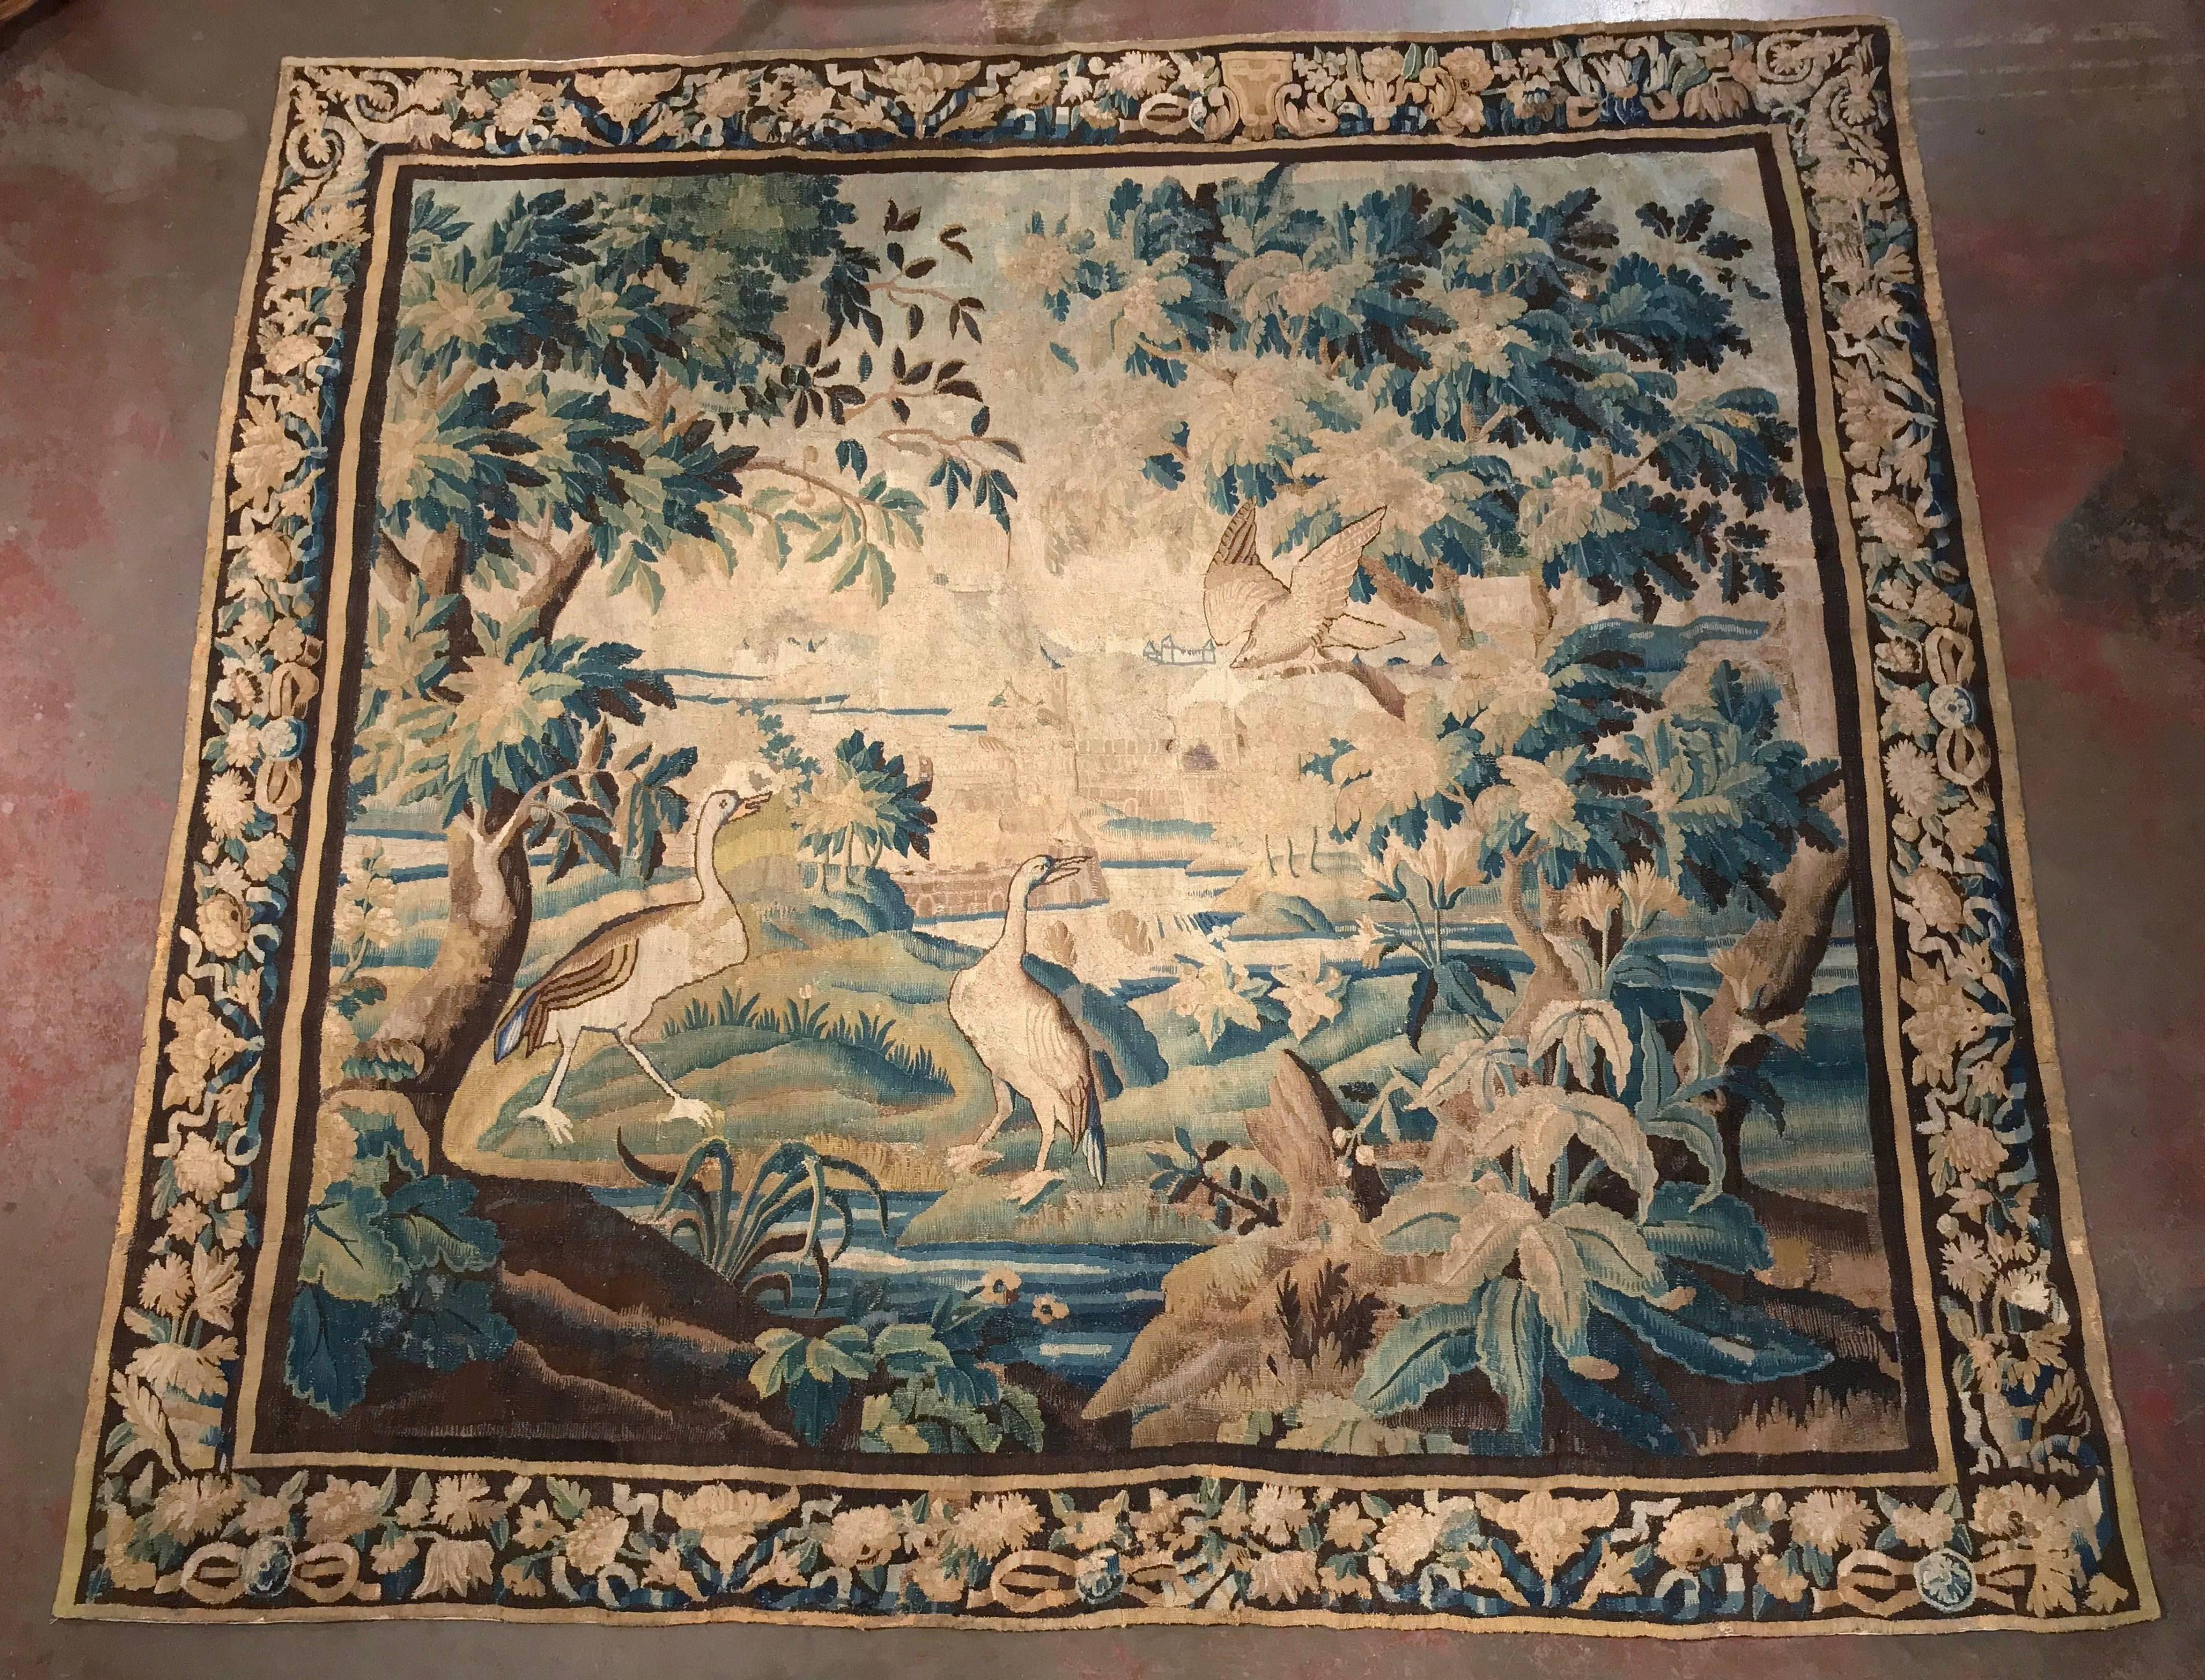 Hand-Woven 18th Century French Aubusson Verdure Tapestry with Birds and Stream